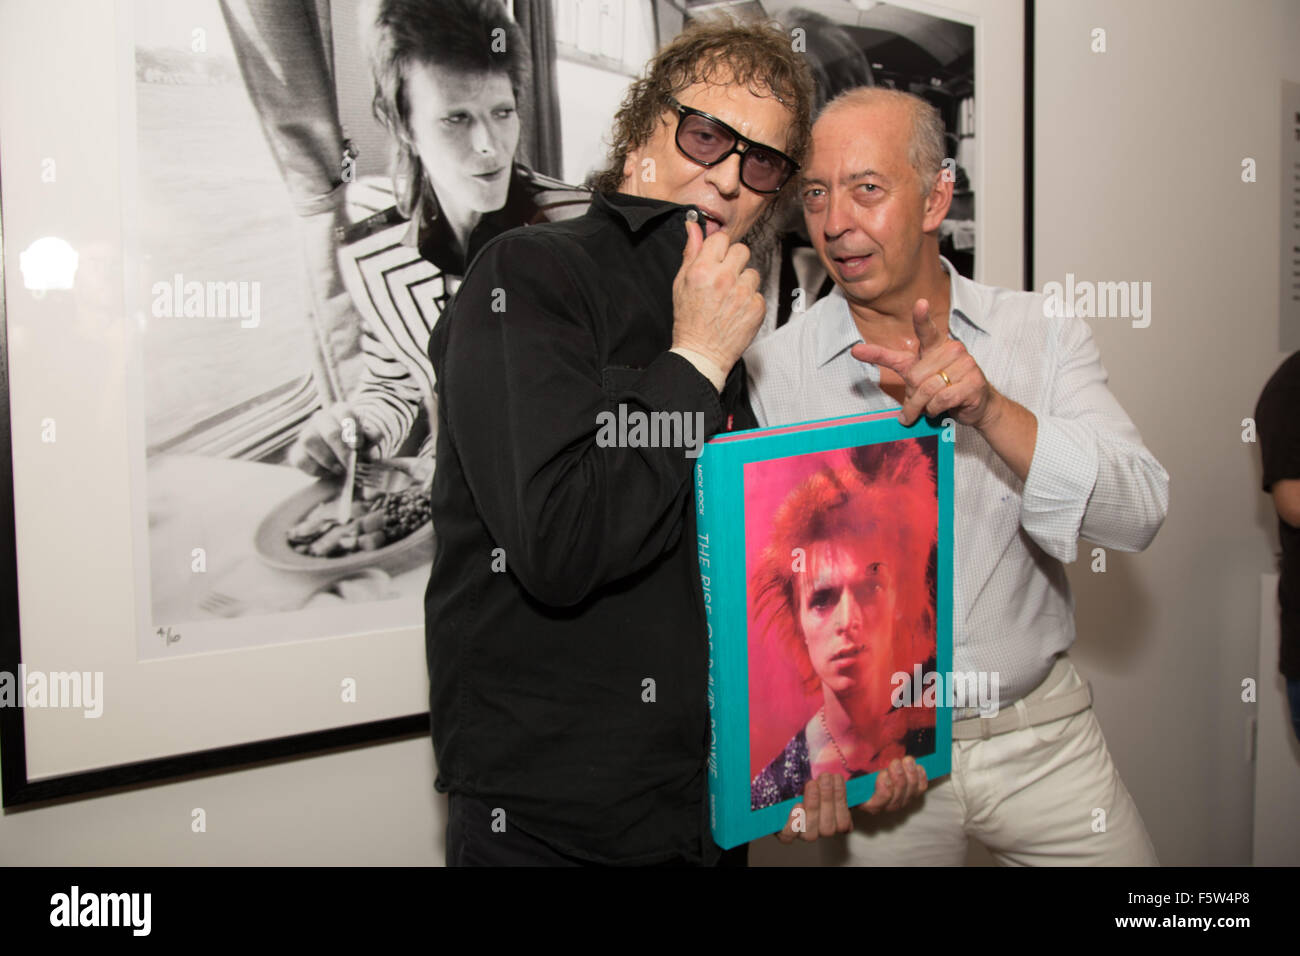 The VIP preview event for the new book 'Mick Rock: Shooting for